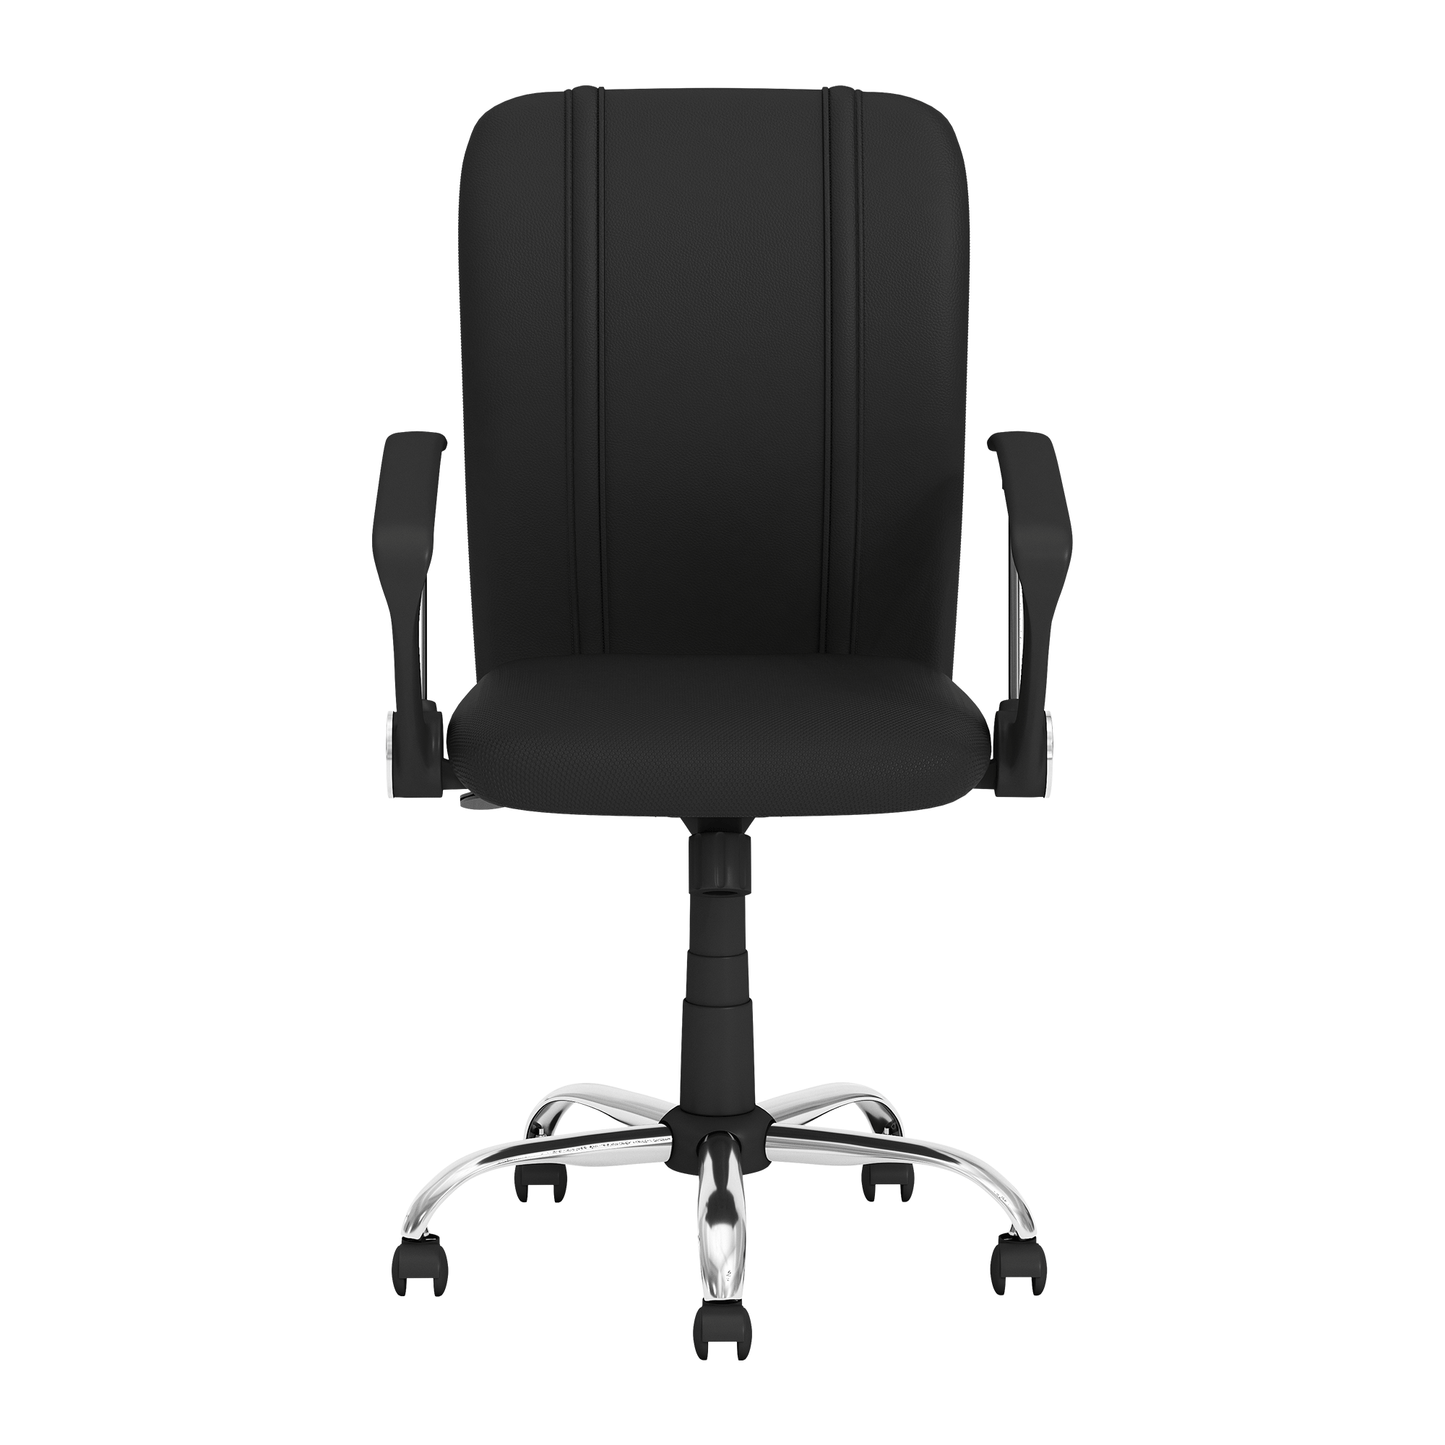 Curve Task Chair with Arizona Coyotes Alternate Logo